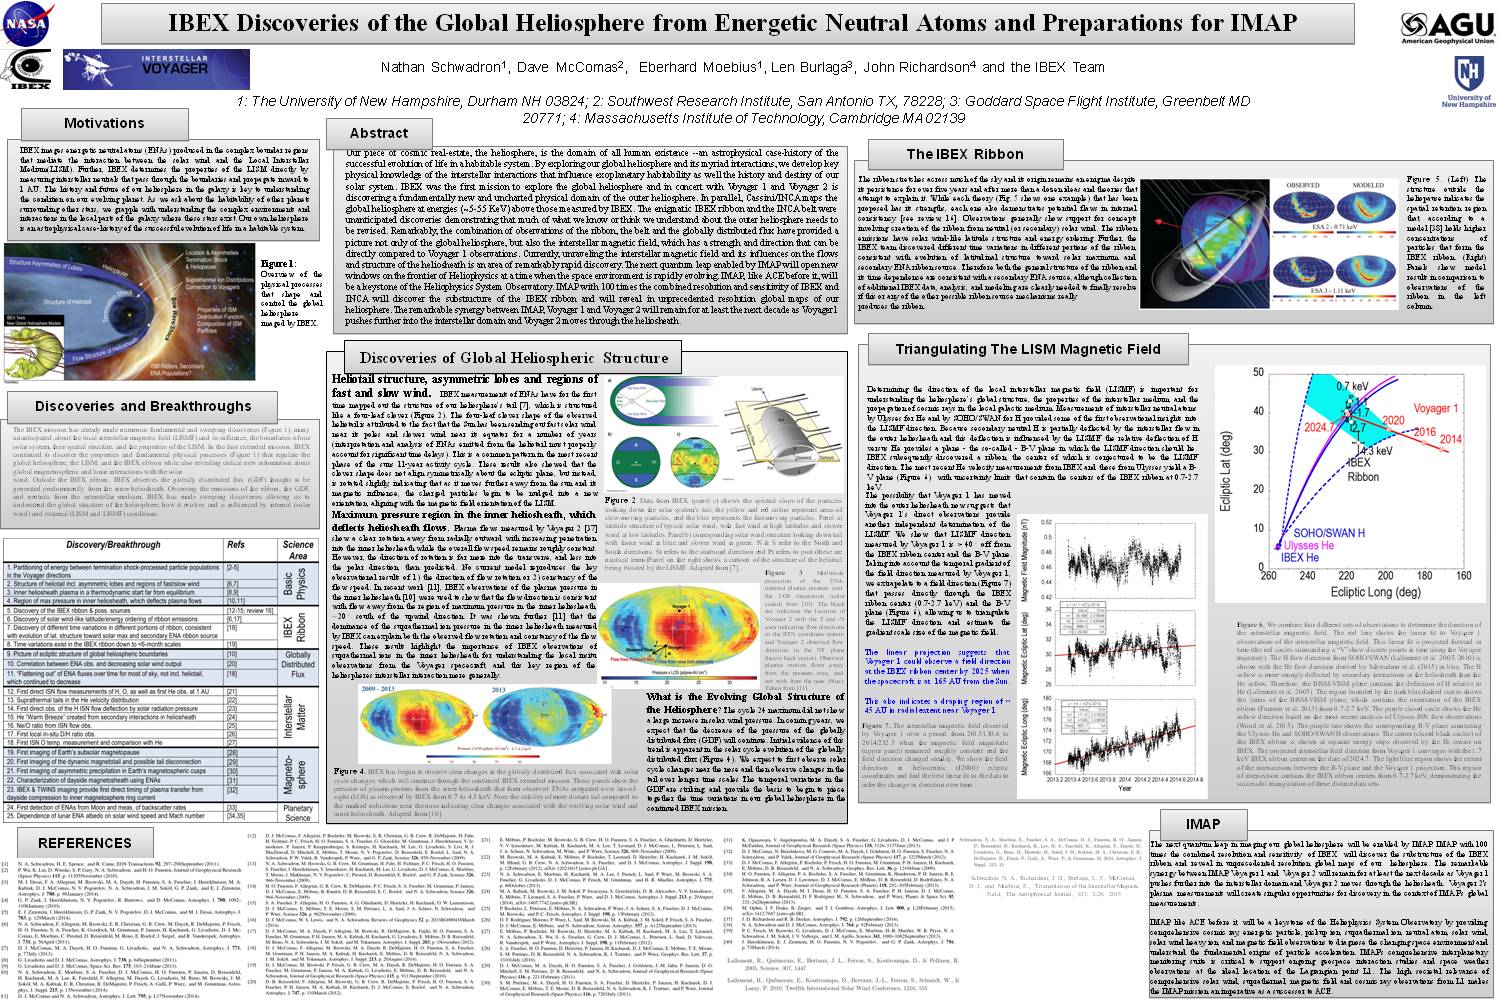 Ibex Discoveries Of The Global Heliosphere From Energetic Neutral Atoms And Preparations For Imap by nschwadron1